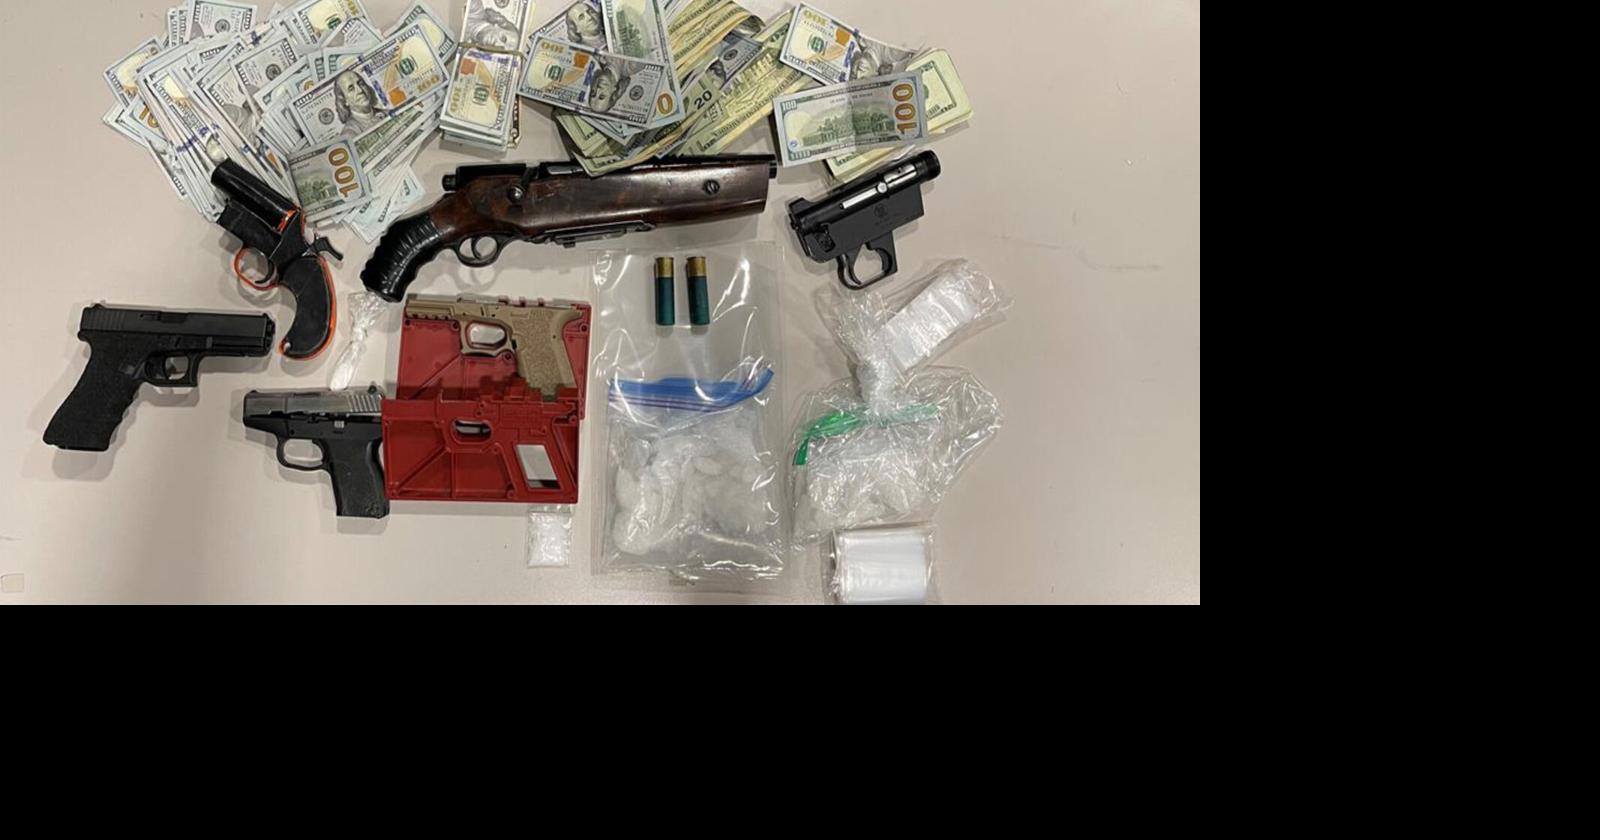 Task force busts criminal operation in San Mateo and San Francisco